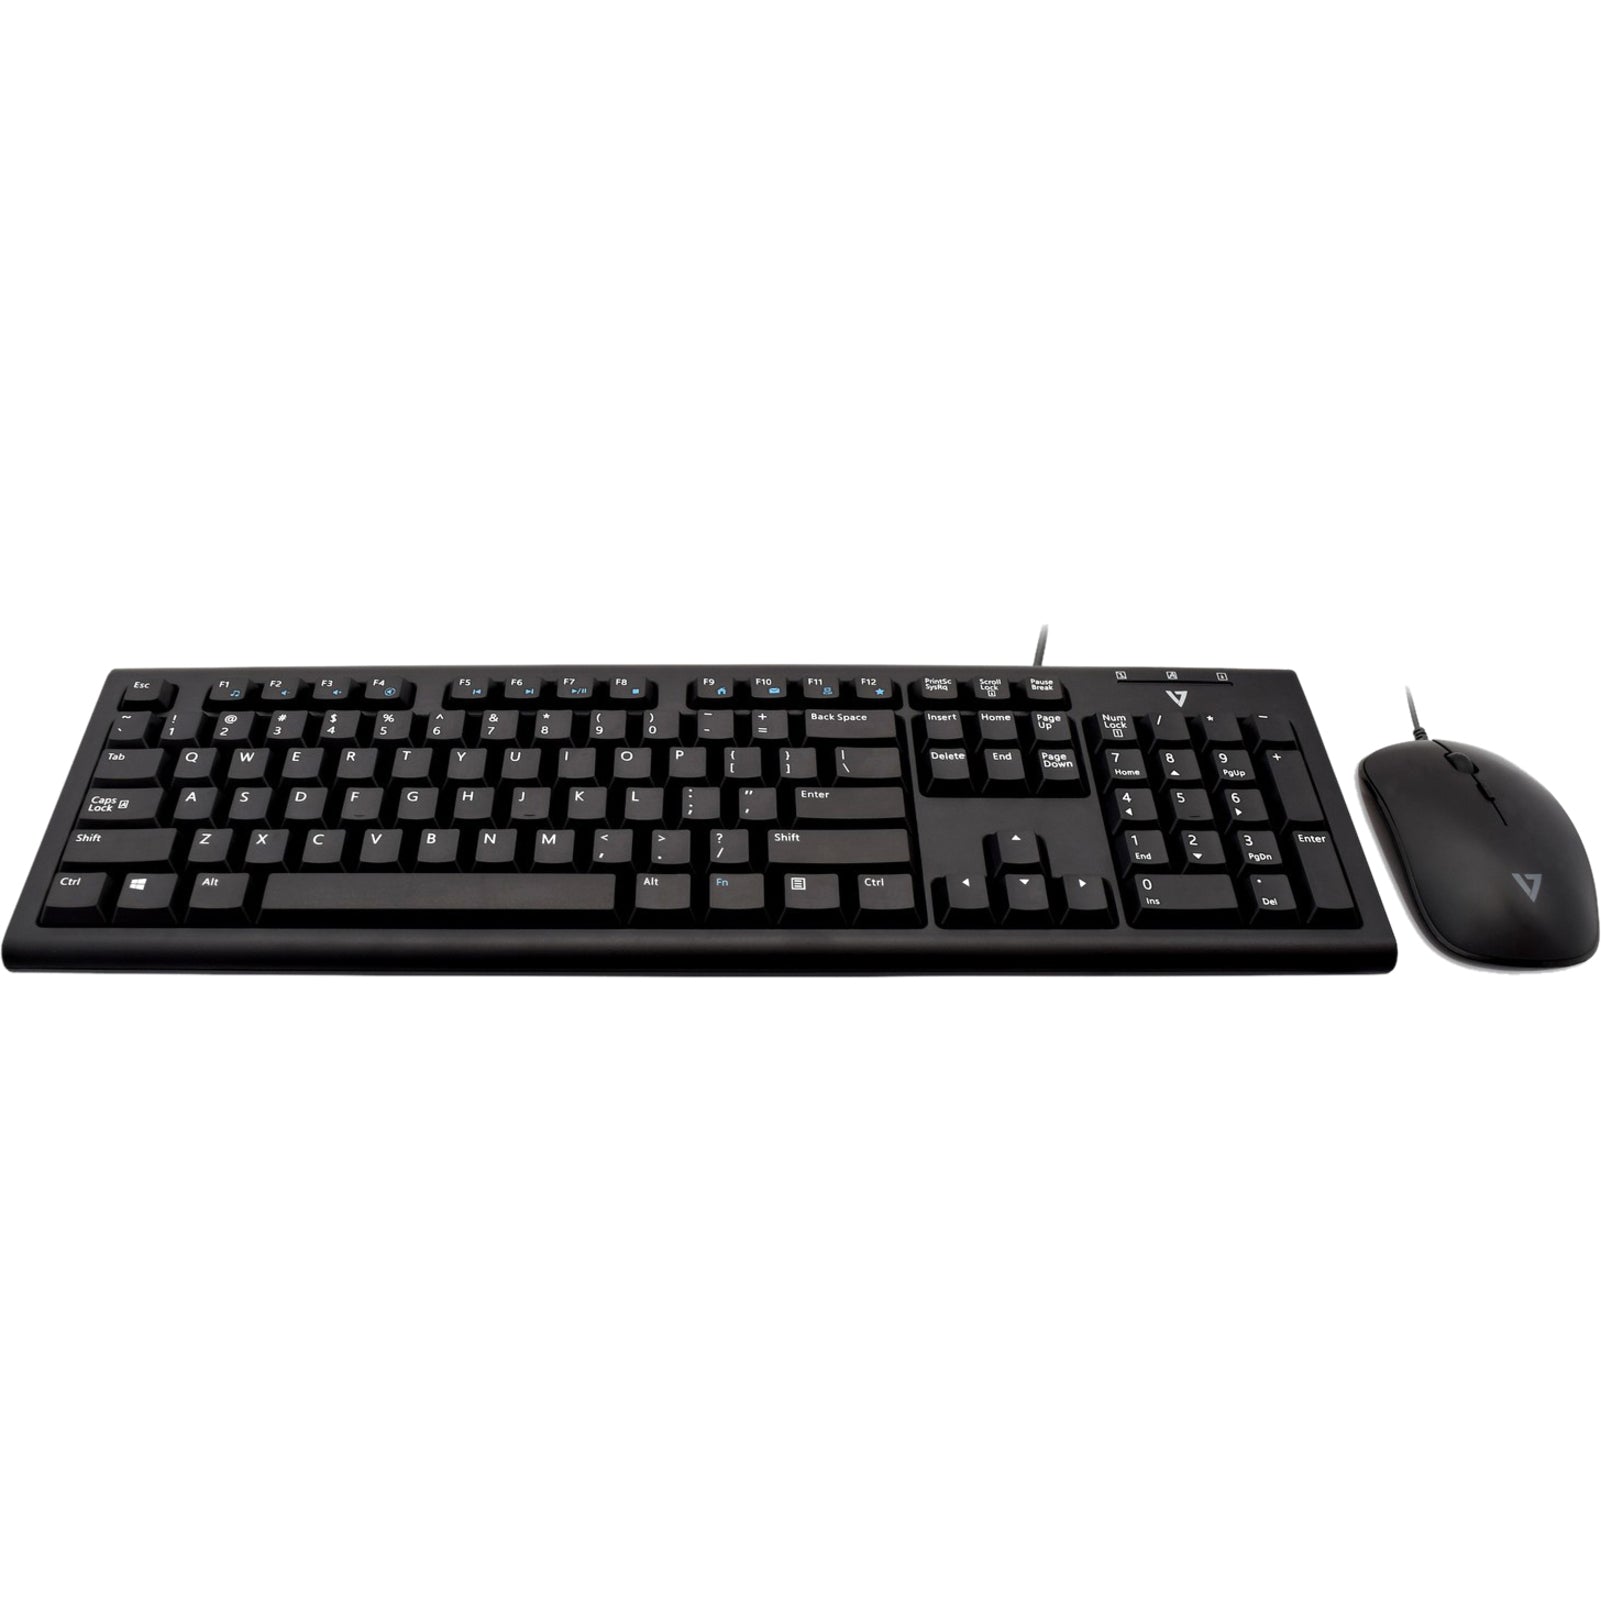 V7 CKU200US Wired Keyboard and Mouse Combo, Spill Resistant, Adjustable Feet, Symmetrical Mouse, 1600 dpi, USB Interface [Discontinued]